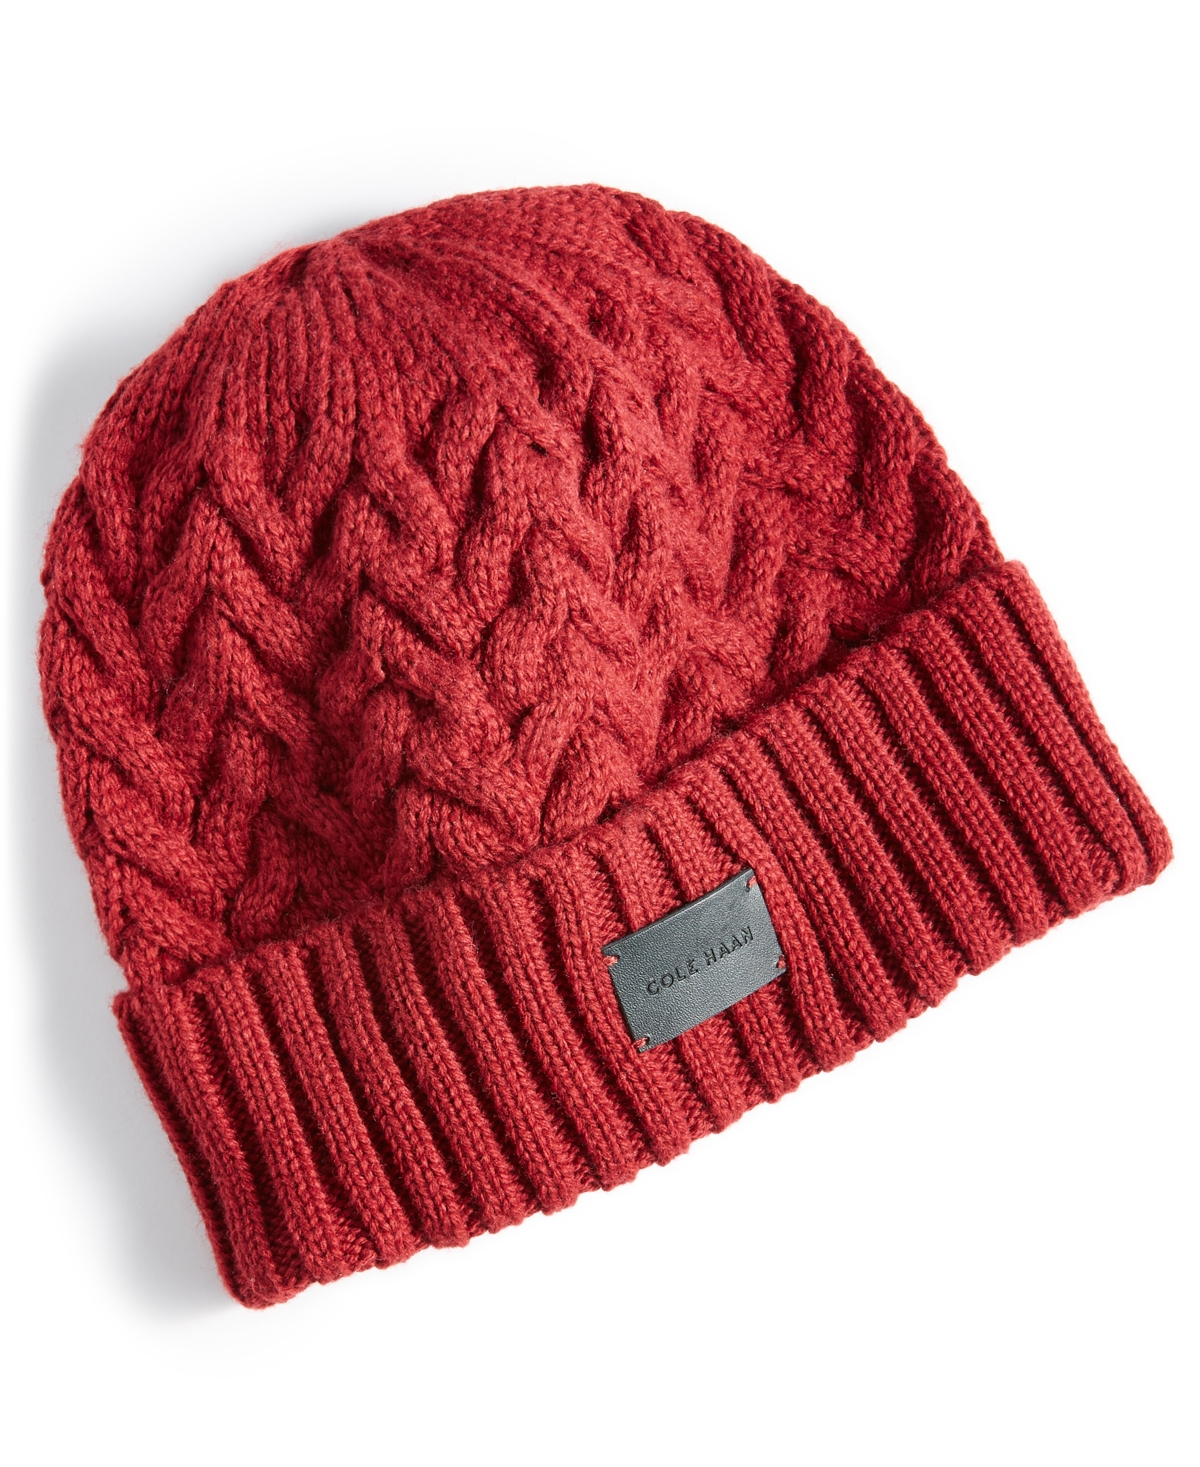 Men's Chainlink Cable Knit Hat - Red